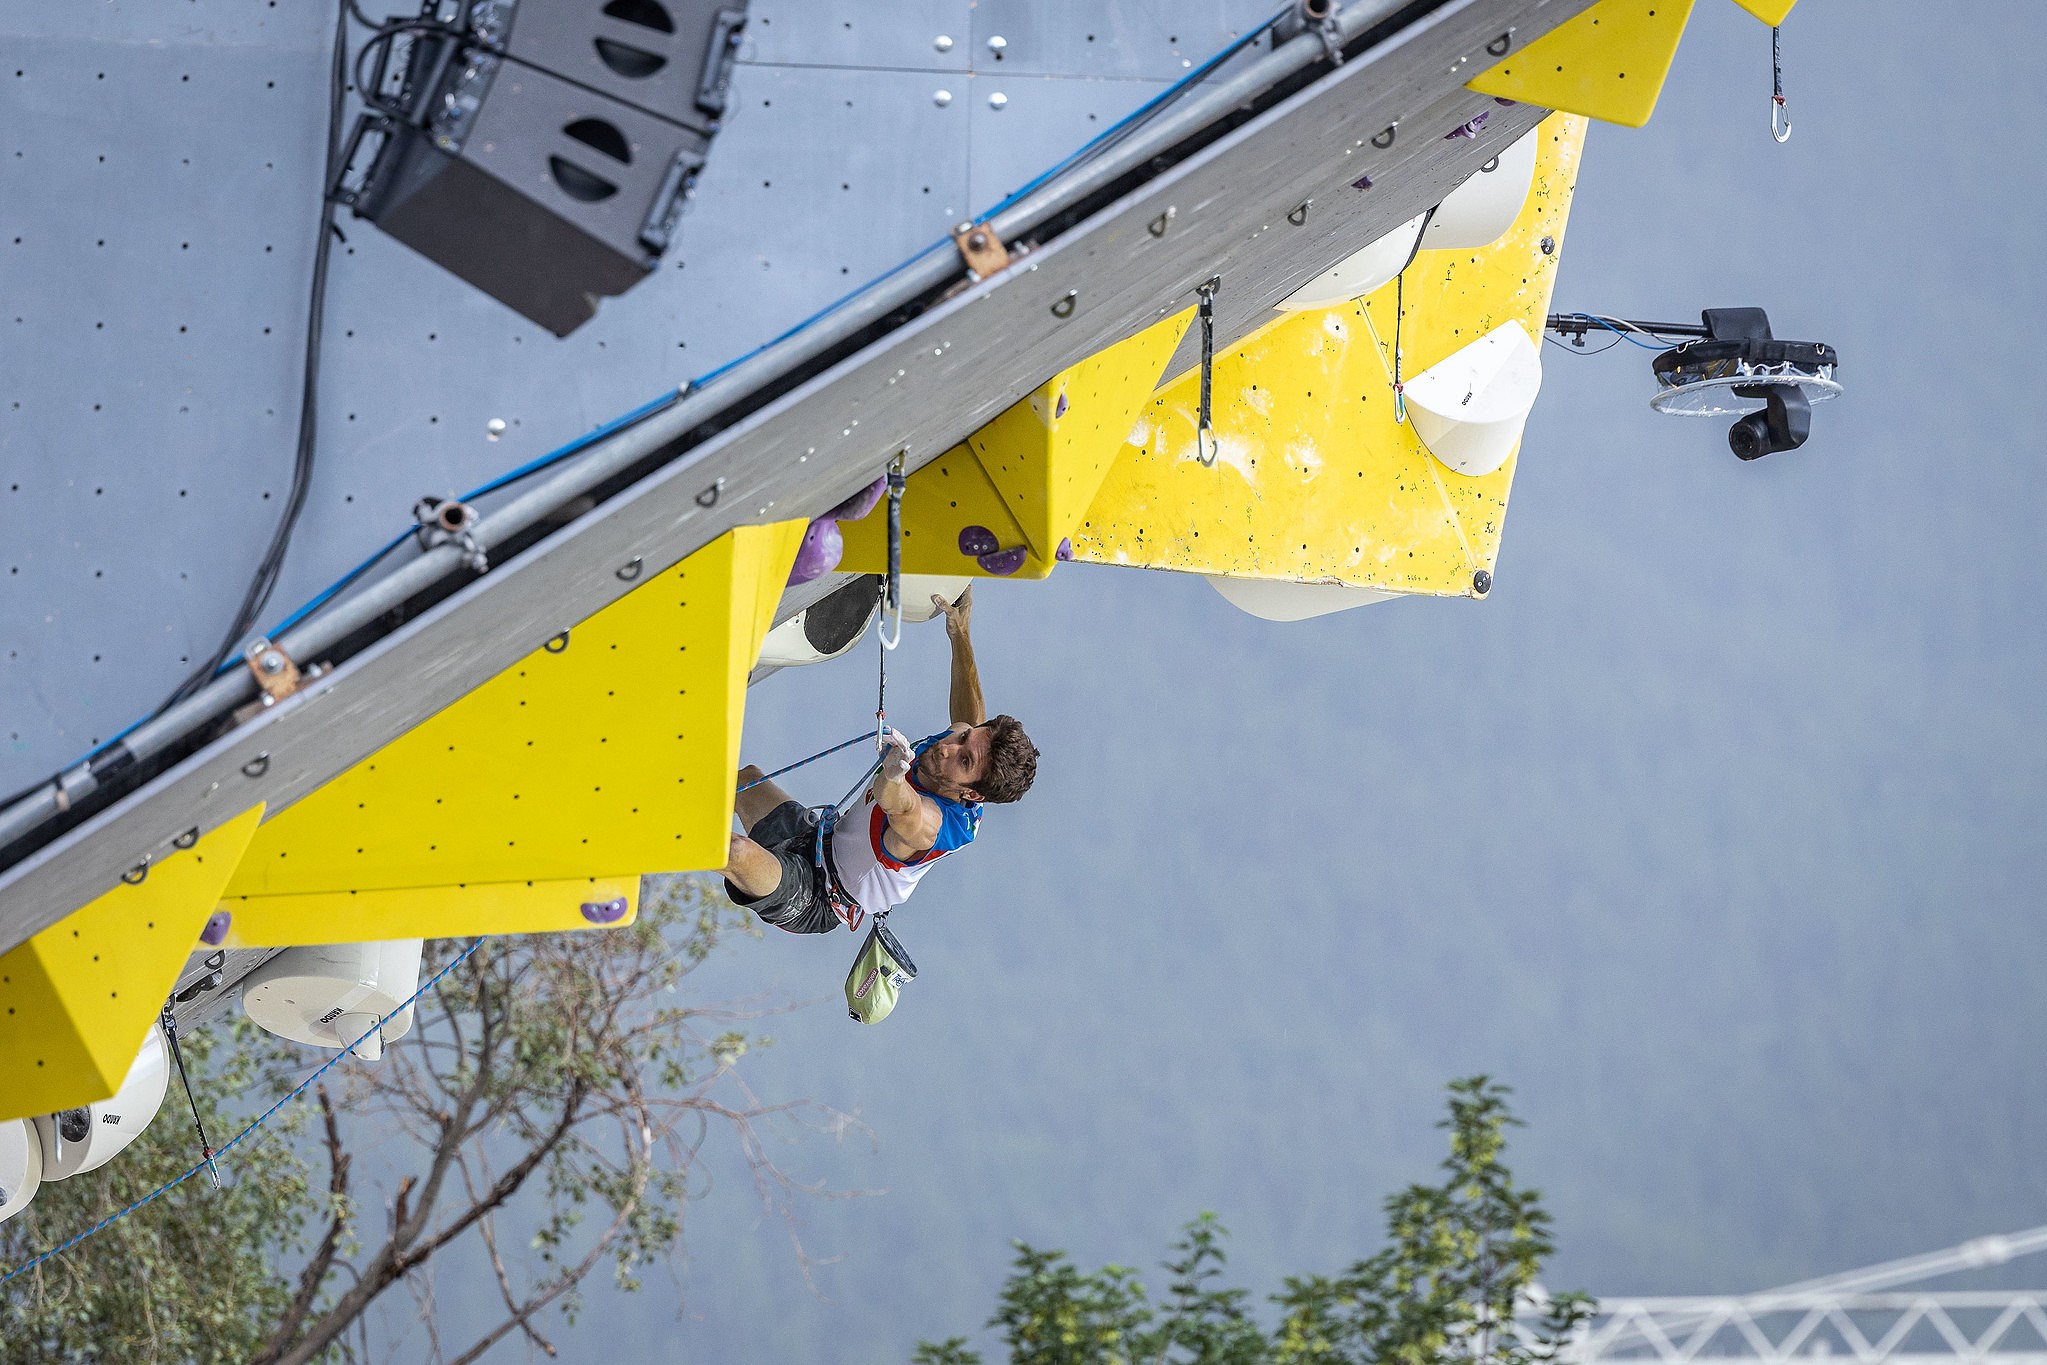 Stefano Ghisolfi on his way to a win in Briançon.  © 2021 Jan Virt/IFSC